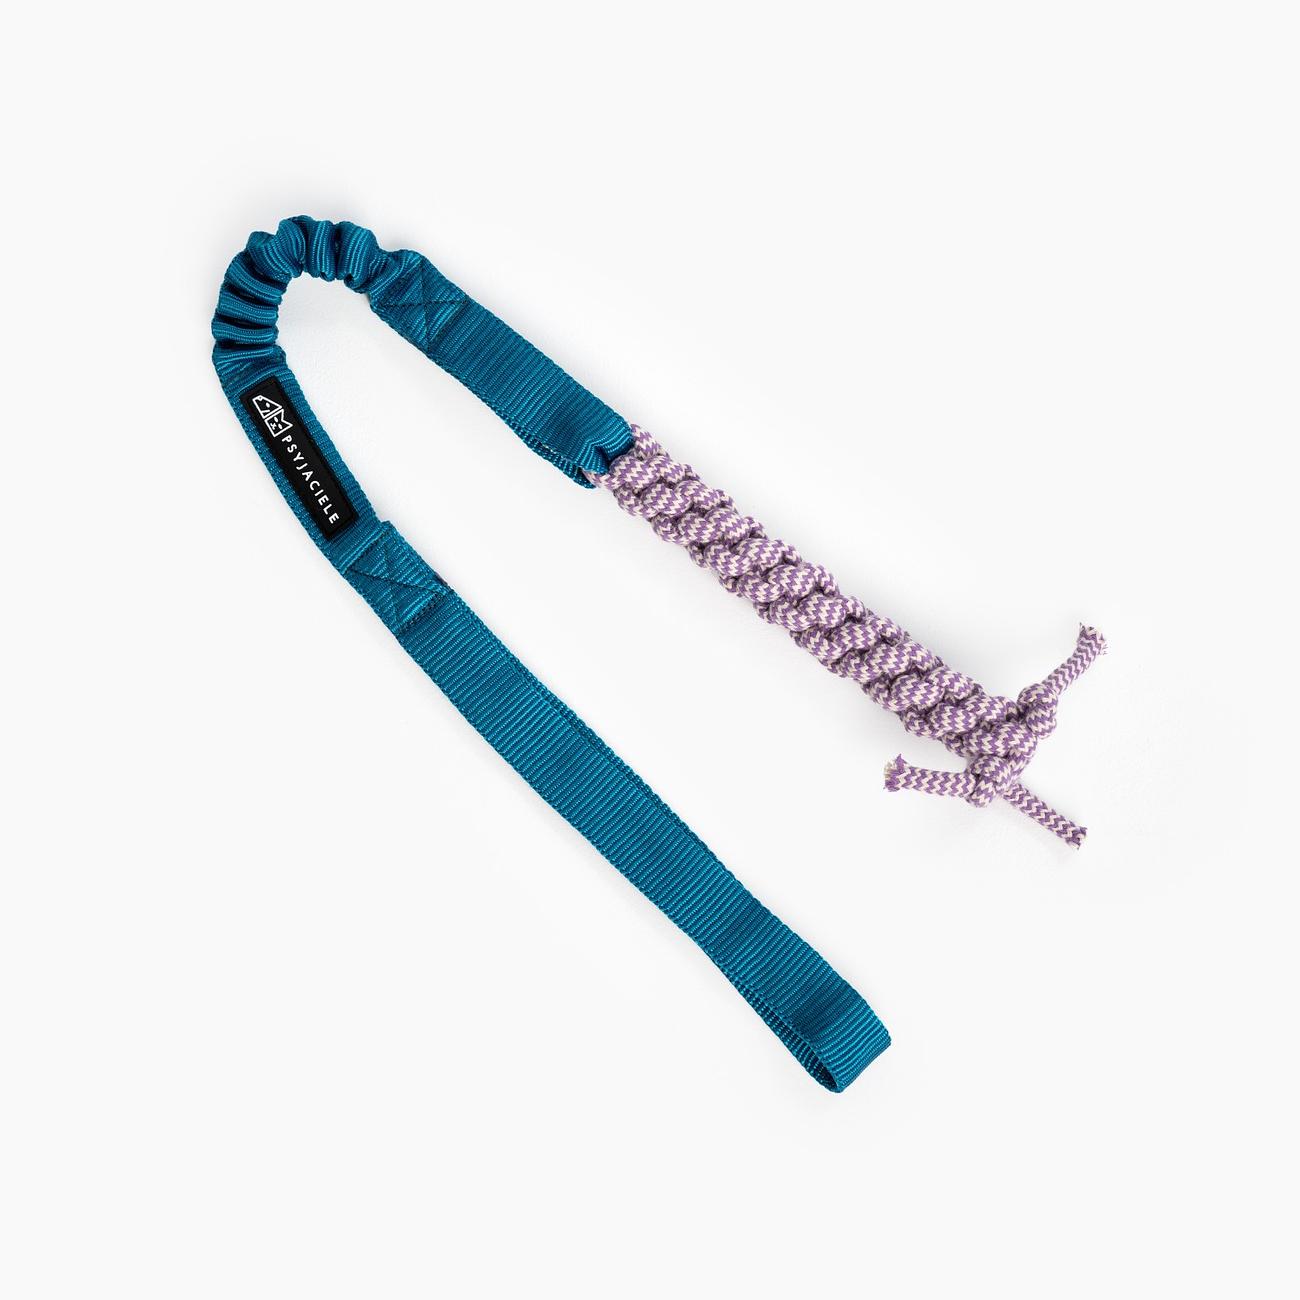 Rope toy "Turquoise AF"